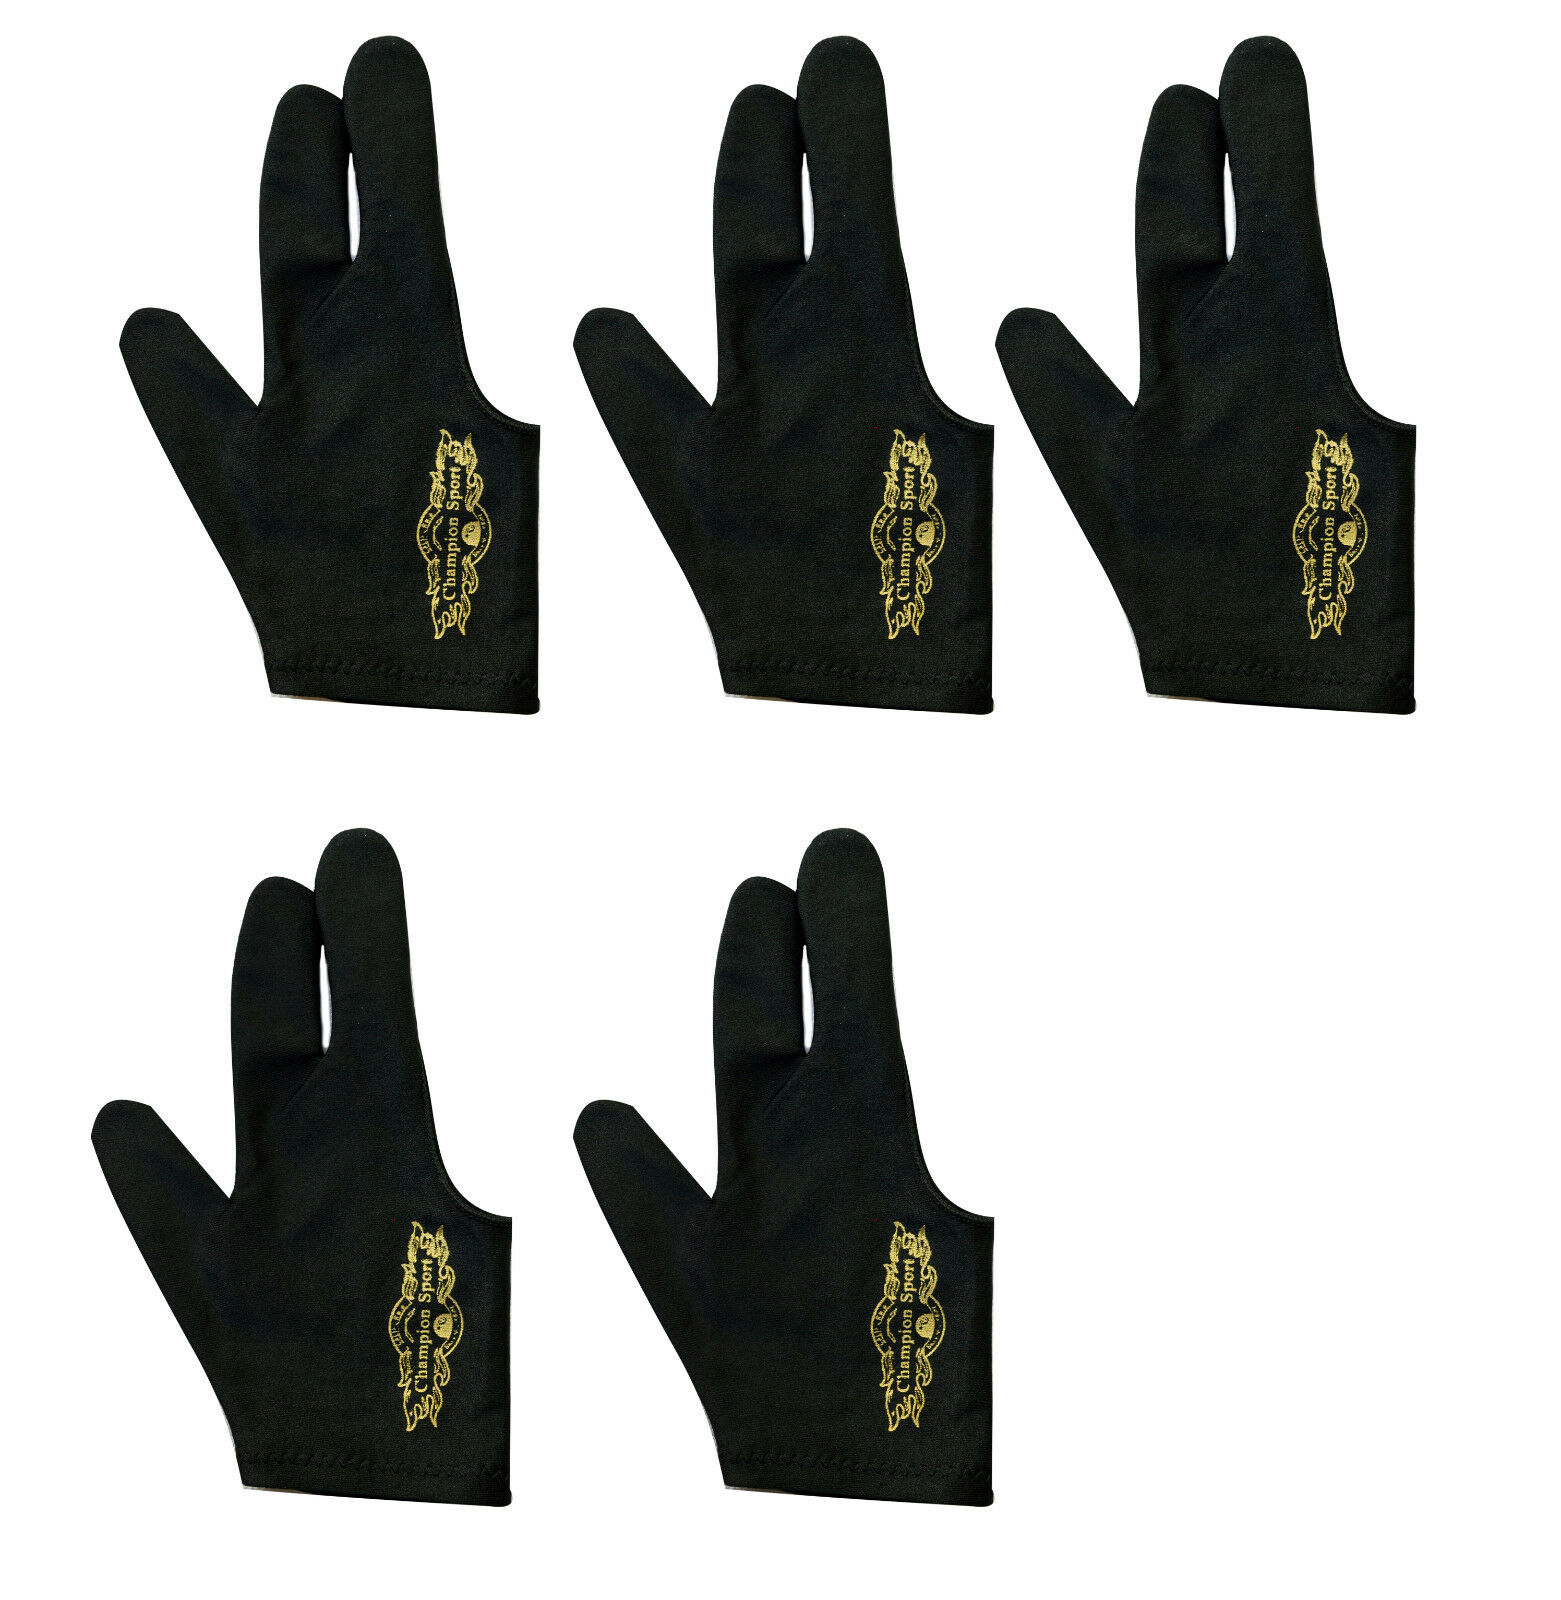 5 Champion Sport Black Right Hand Billiards Gloves For Pool Cues